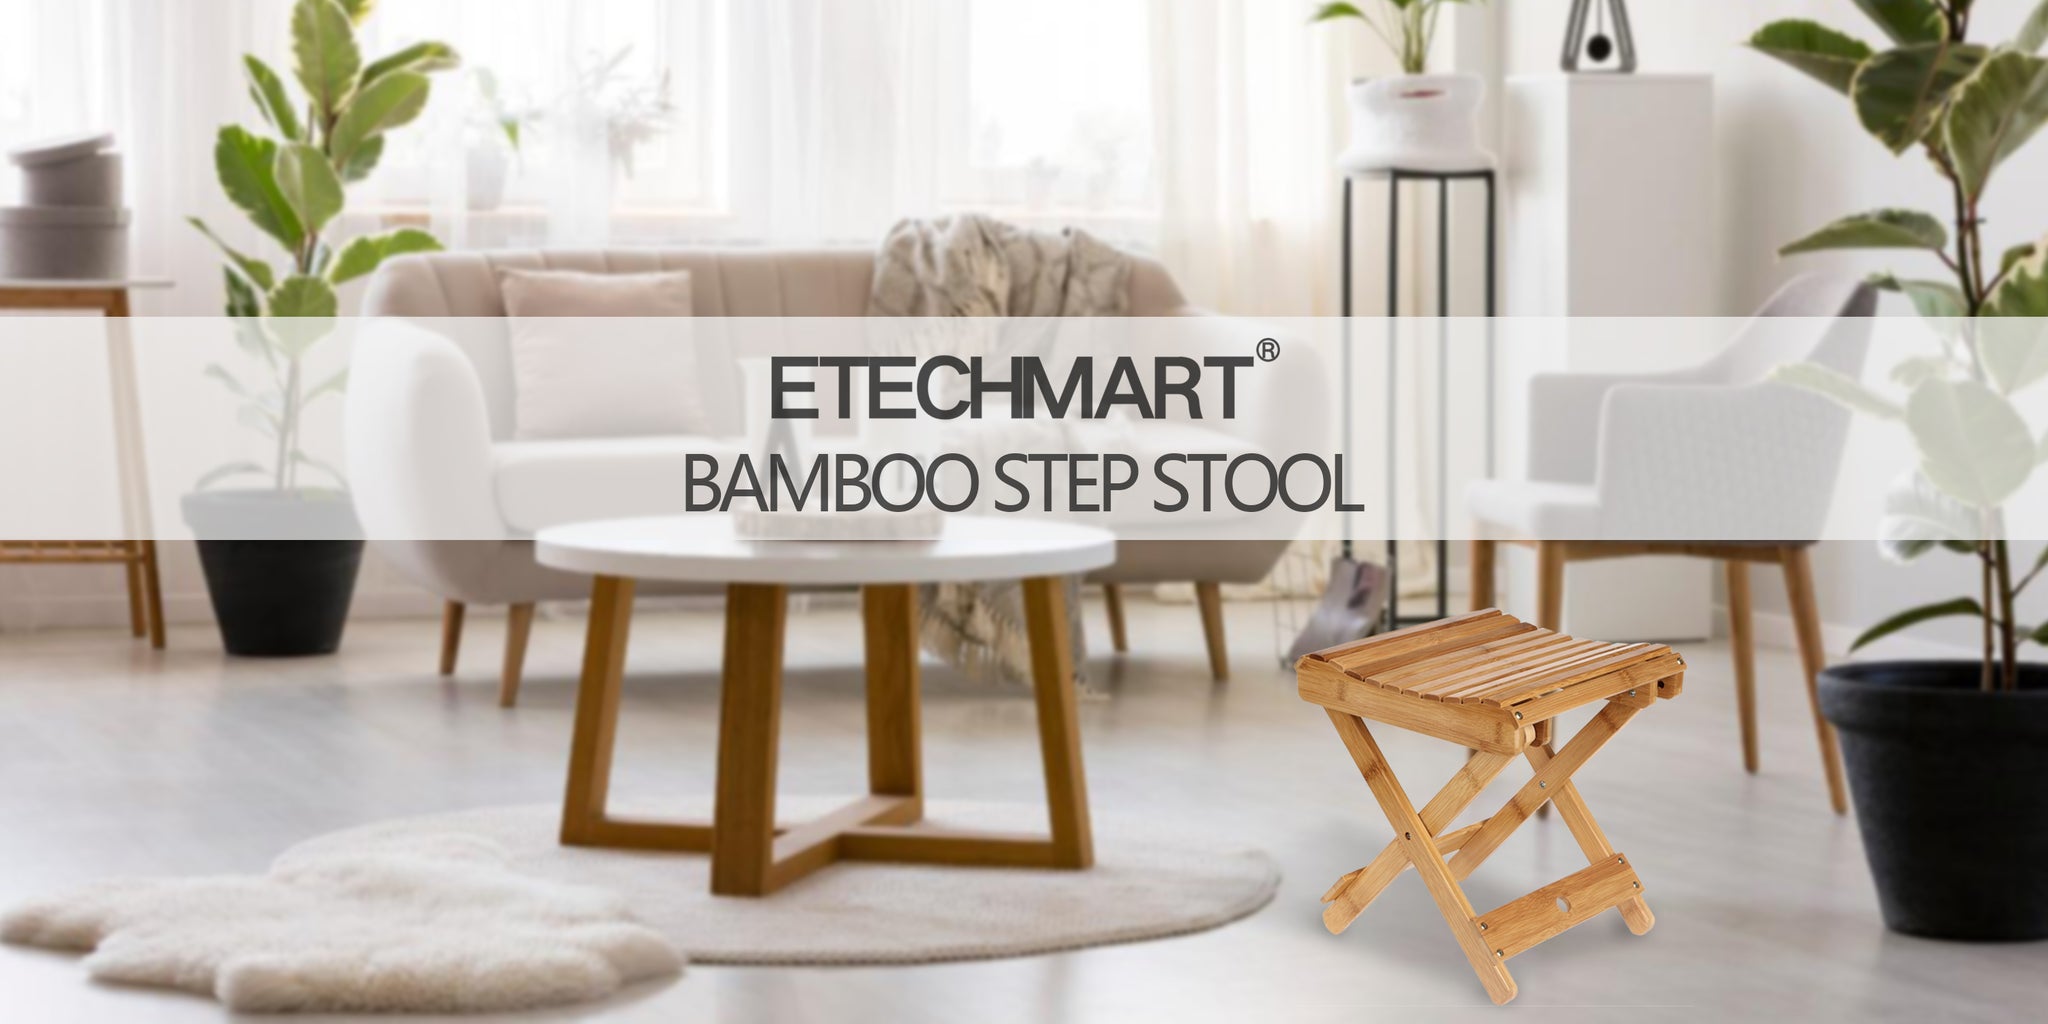 Bamboo Furniture: Is It Sustainable?